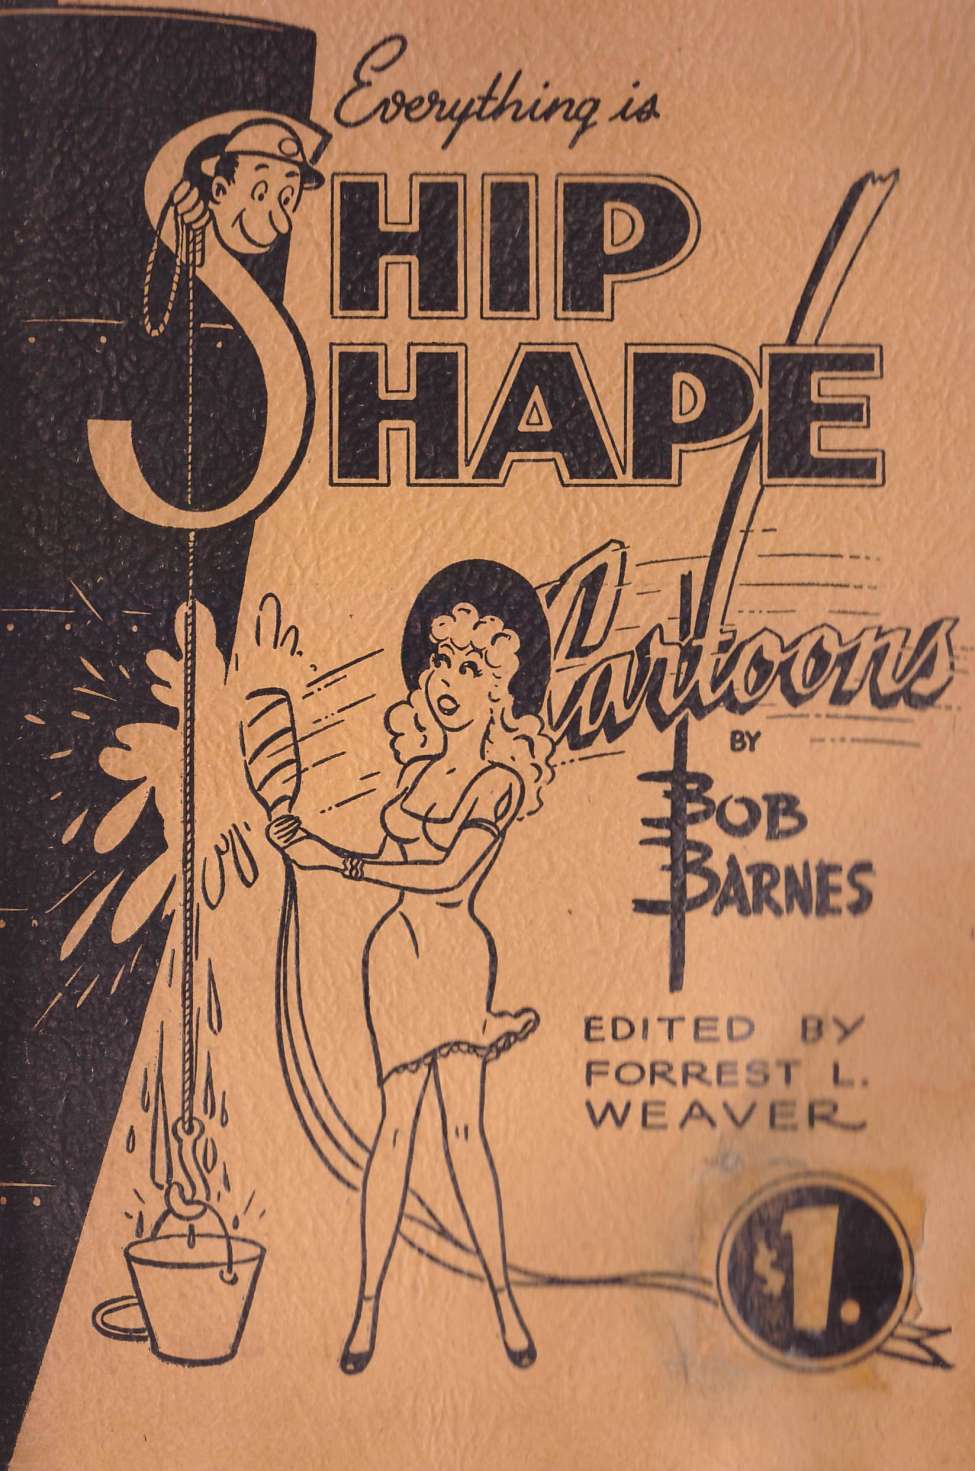 Comic Book Cover For Everything is Ship Shape